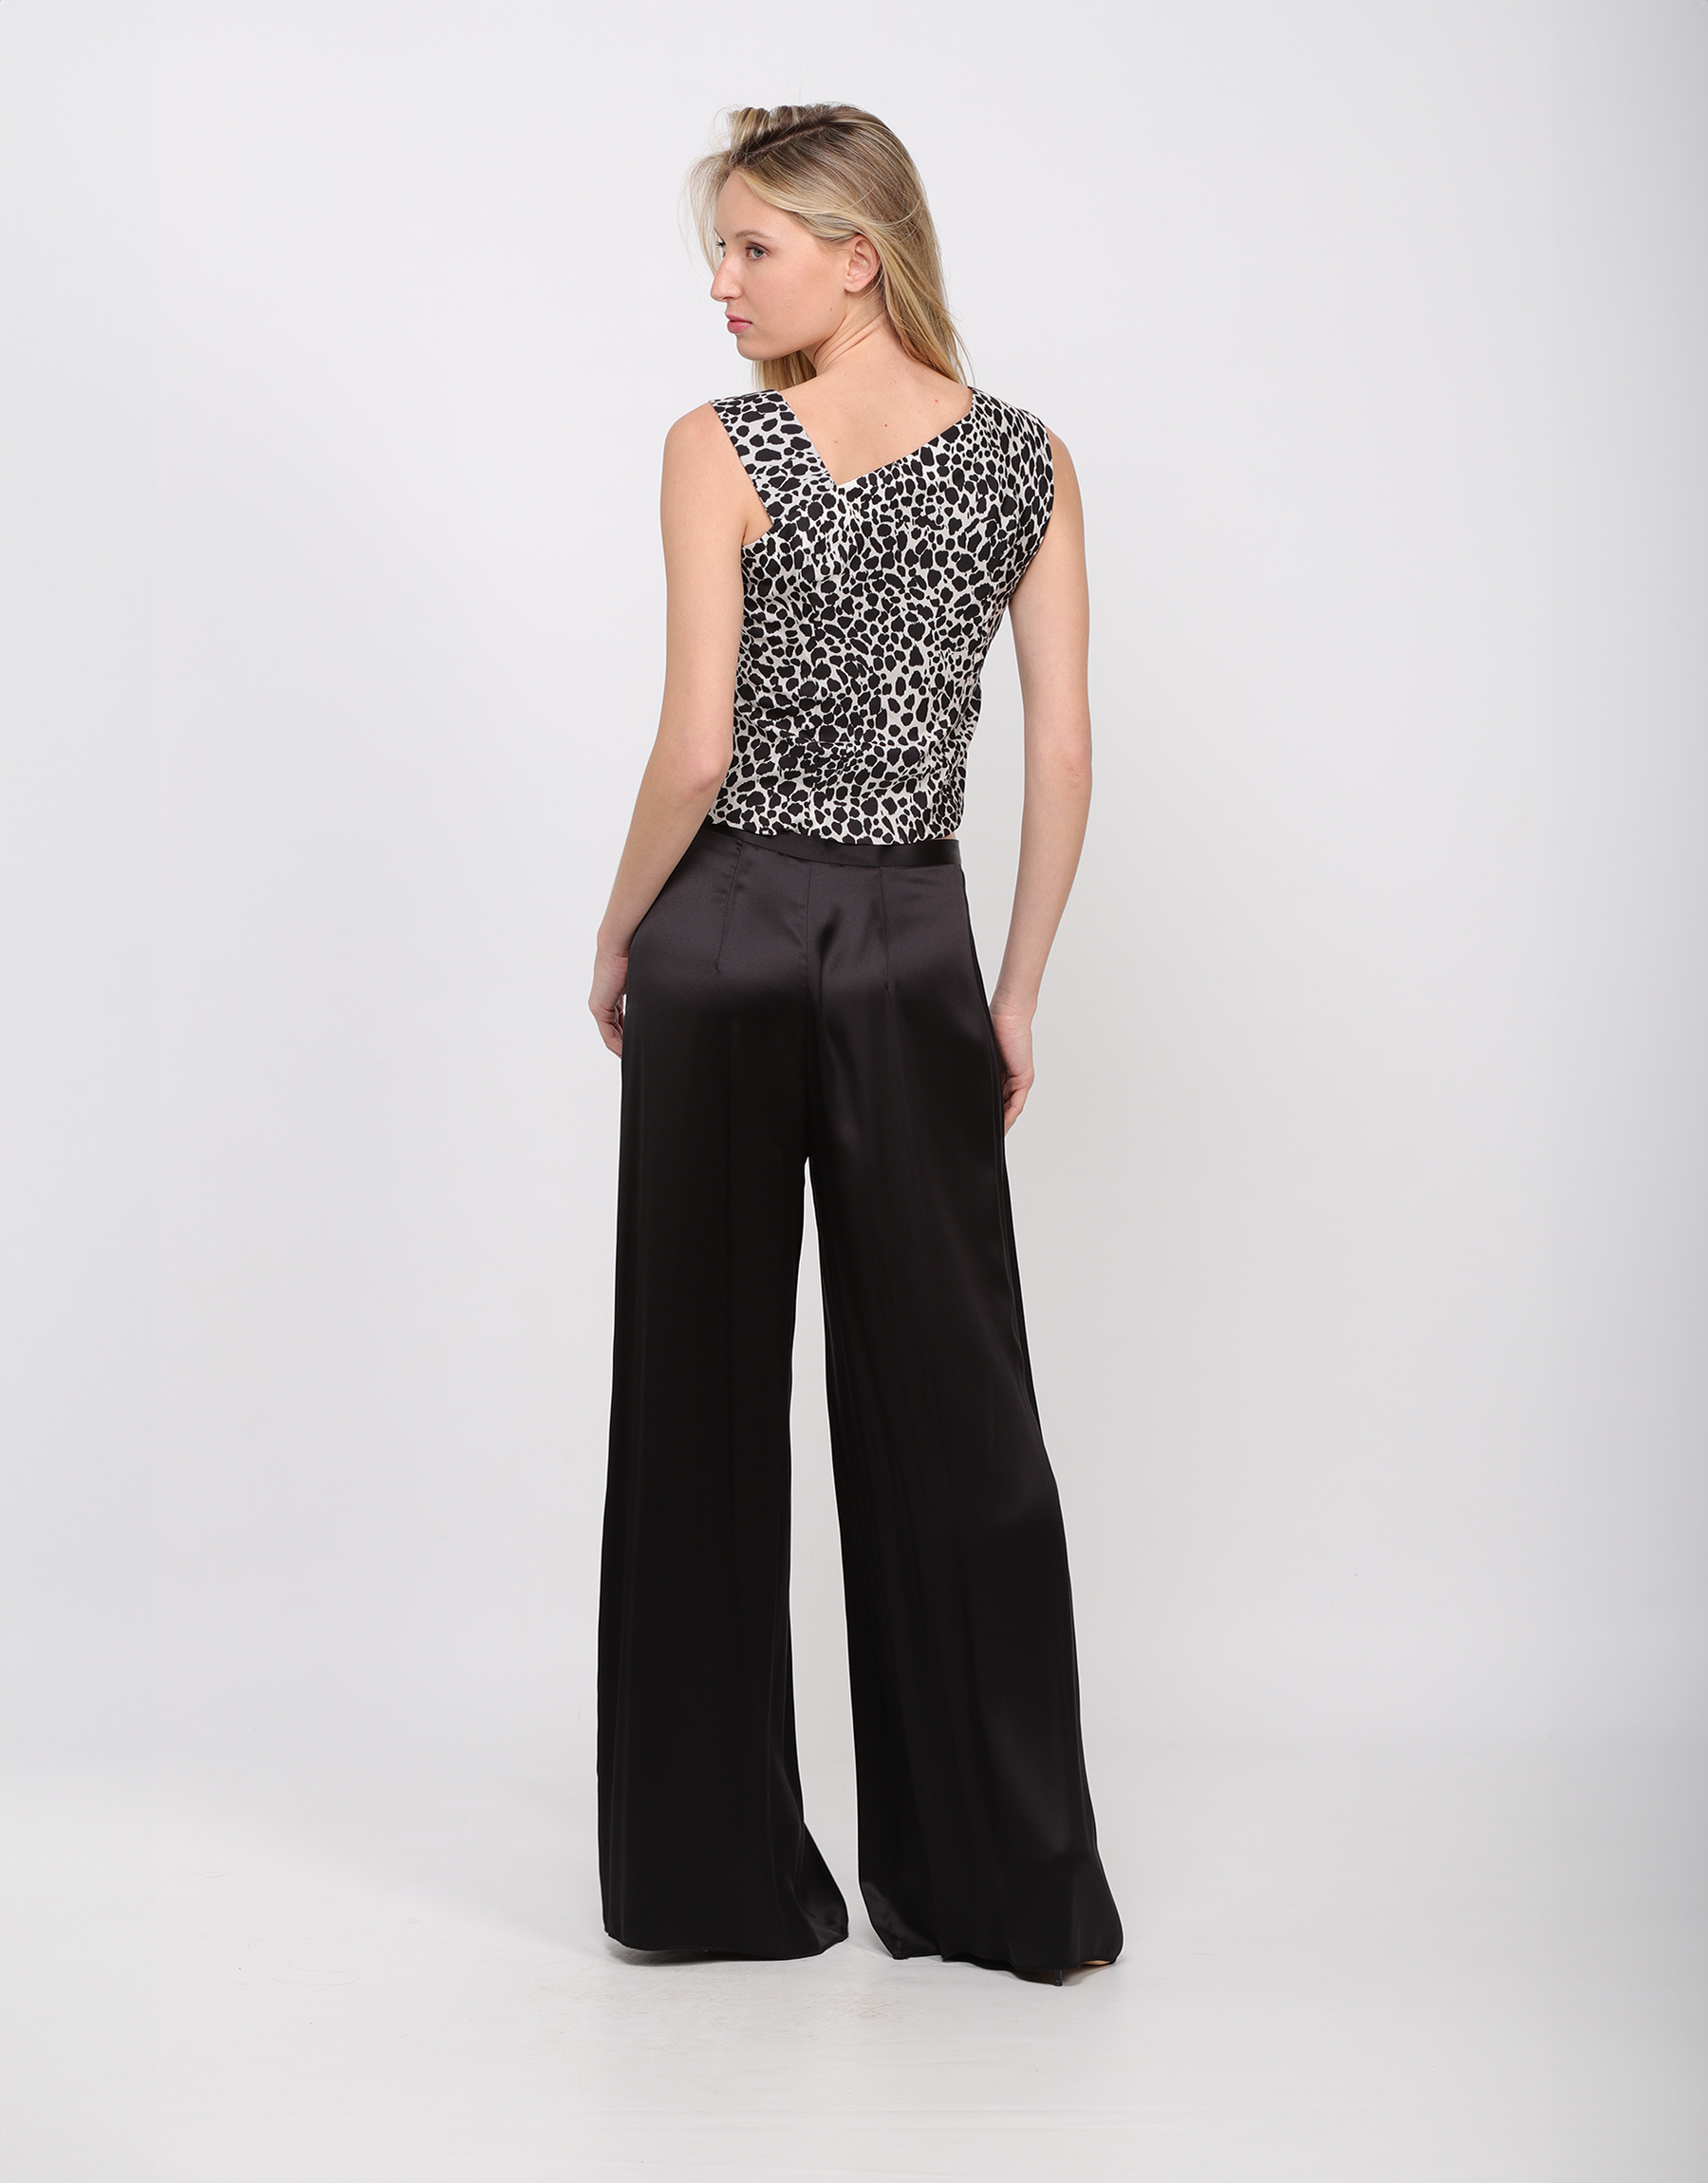 Embroidered patchwork top in black and white printed silk